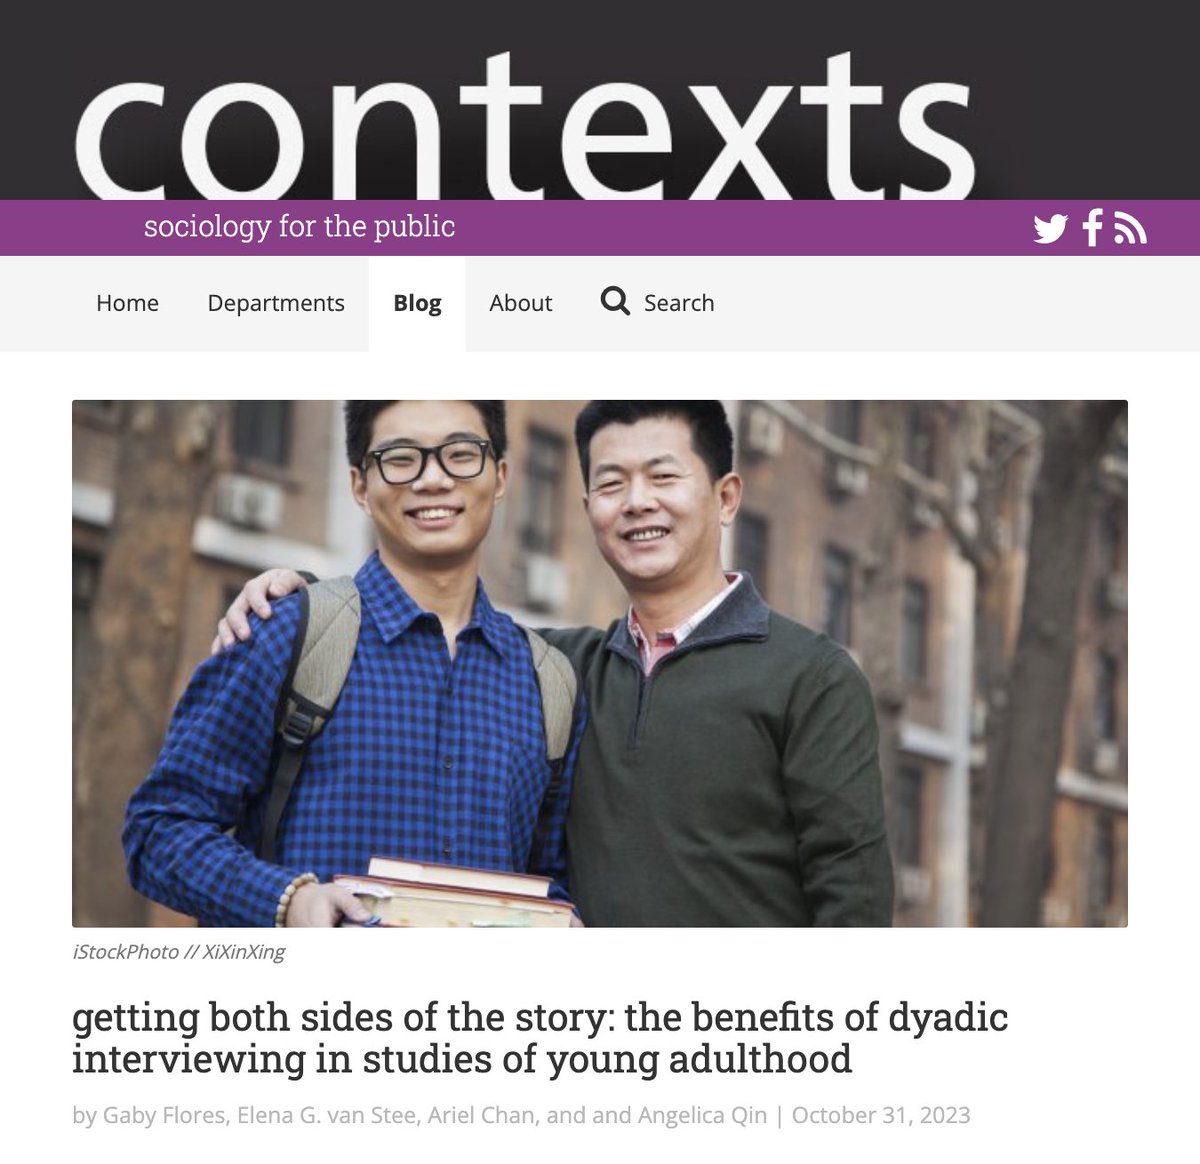 What can sociologists learn from interviewing multiple members of the same family? 

This week on the @contextsmag blog, I’m in conversation with Gaby Flores (@UCMsociology) and my research assistants Ariel Chan (@Stanford) & Angelica Qin (@PUSociology) to discuss our research